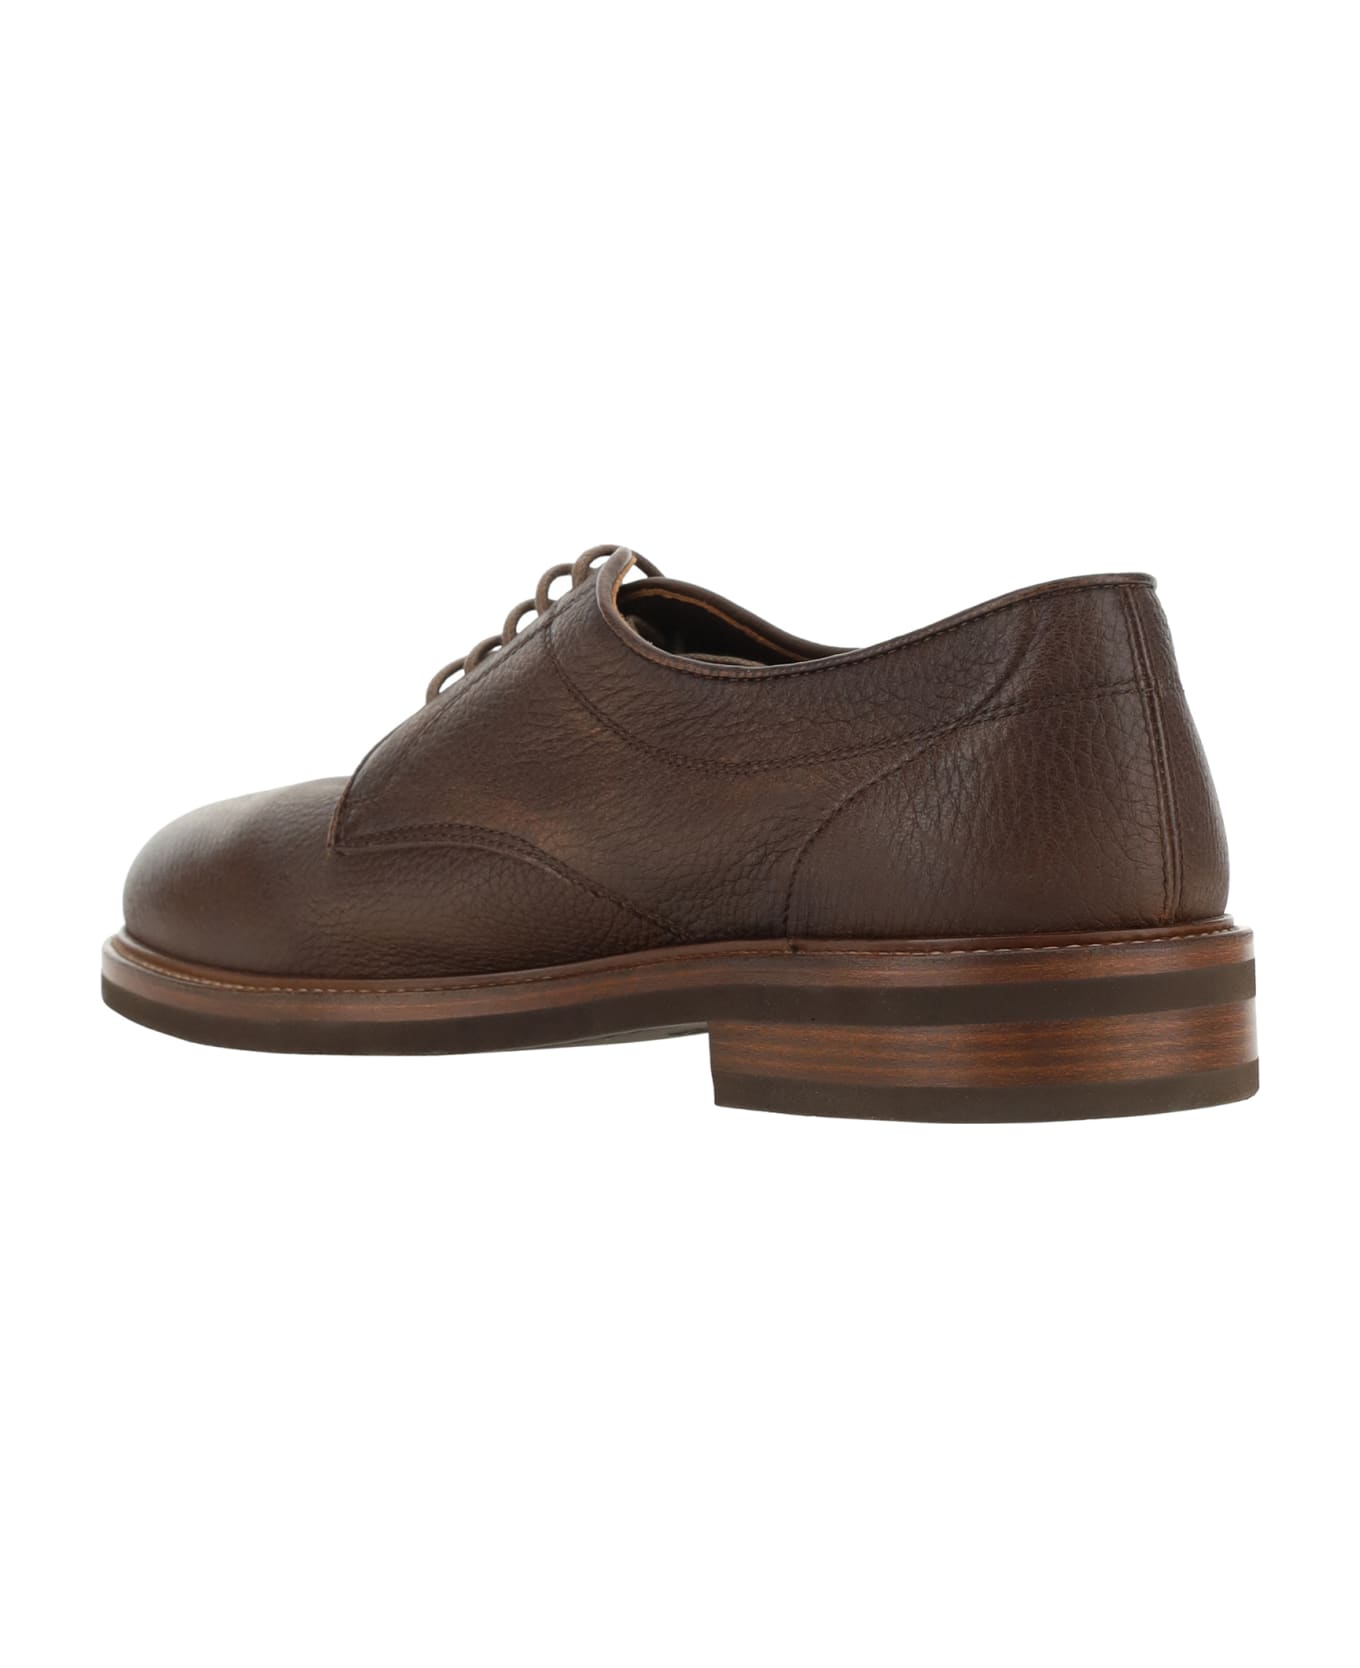 Brunello Cucinelli Lace-up Shoes Heelys - Tabacco